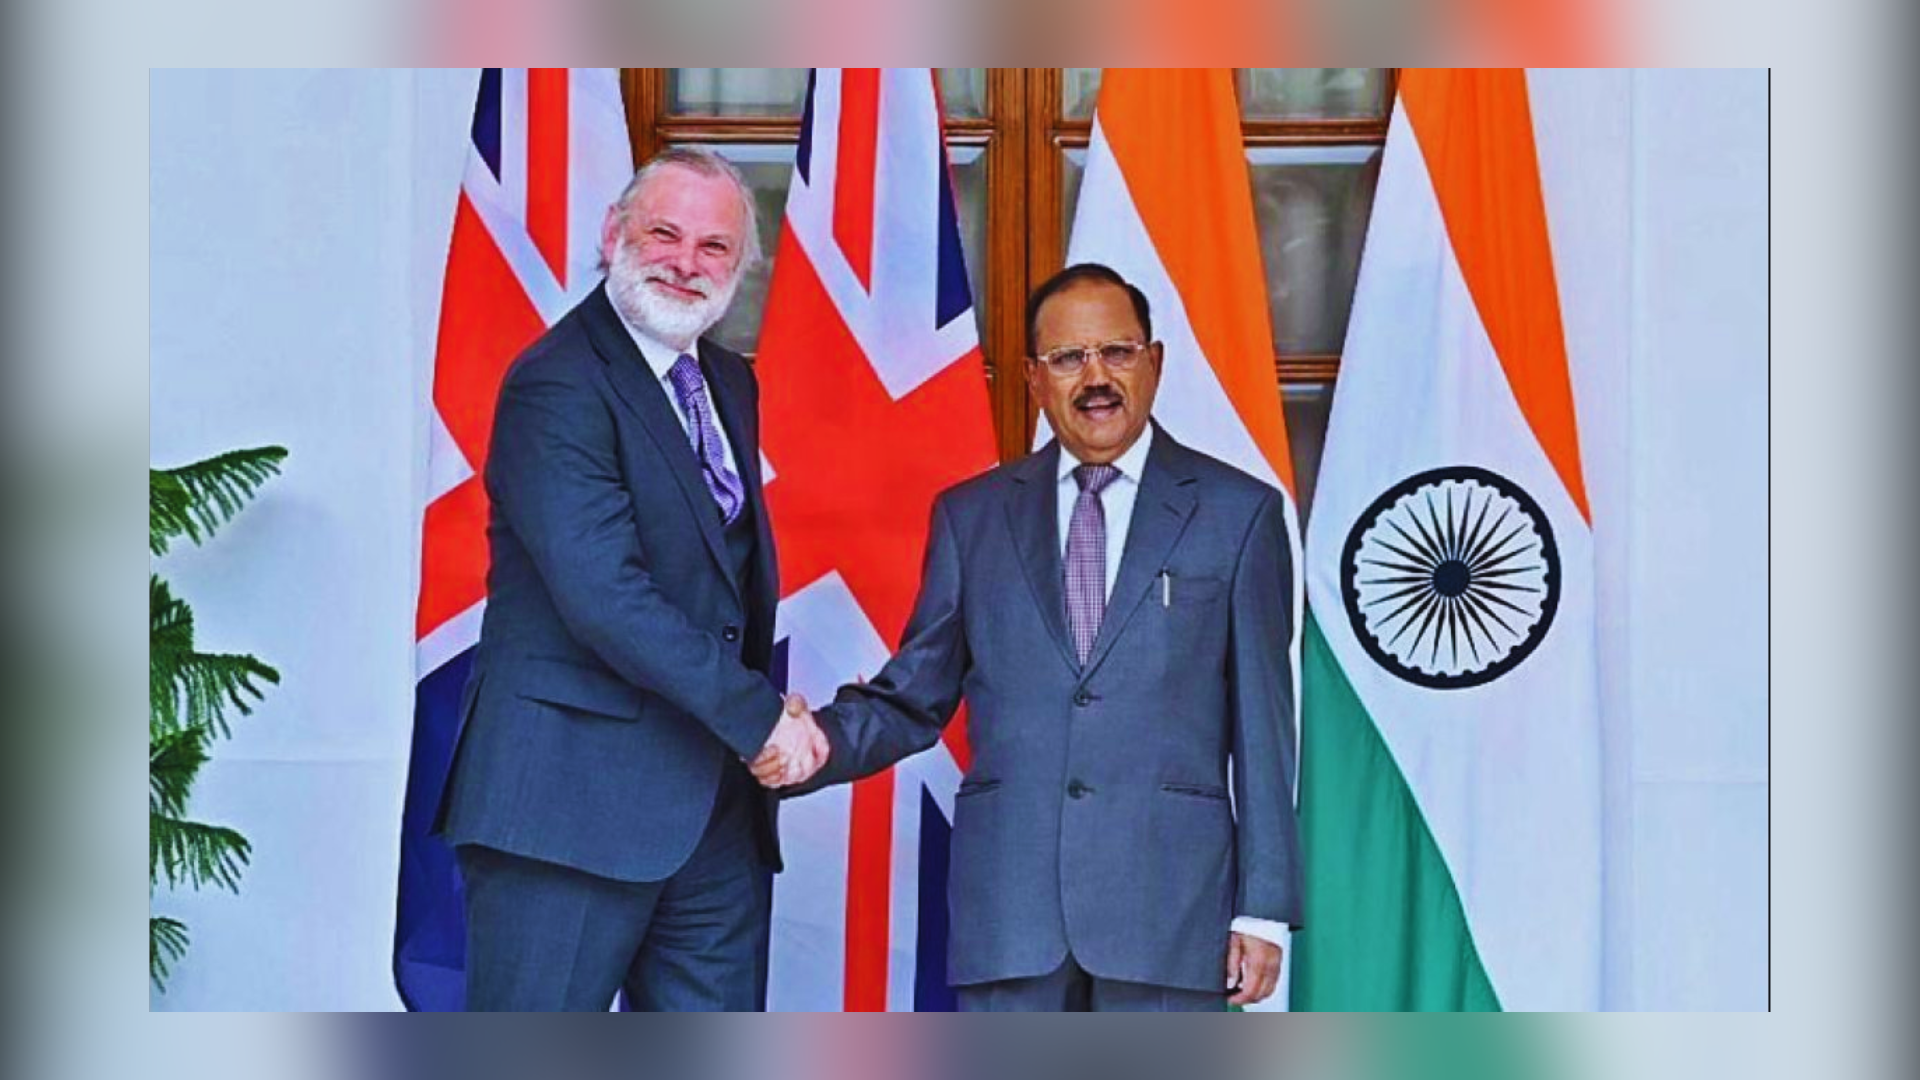 NSA Ajit Doval And UK Counterpart Engage In Strategic Dialogue On Critical Technology And Global Affairs